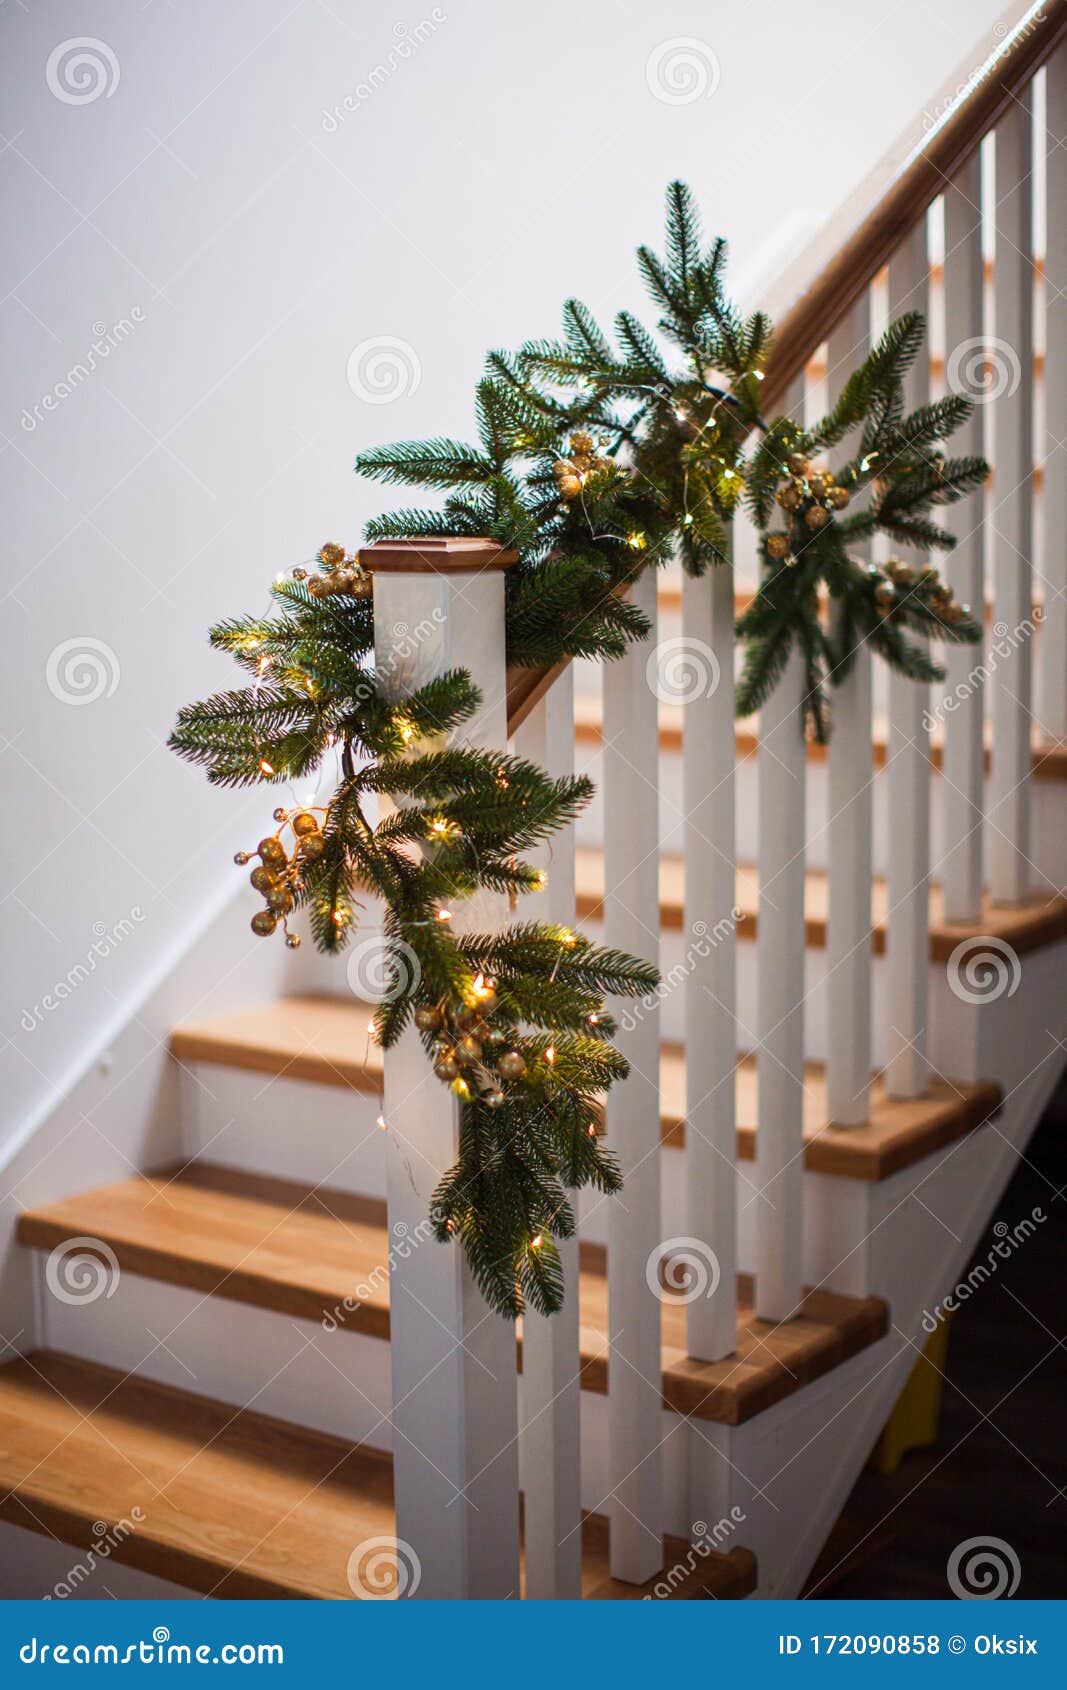 Christmas Decoration Of Stairs In The House Stock Photo Image Of Cozy Banister 172090858